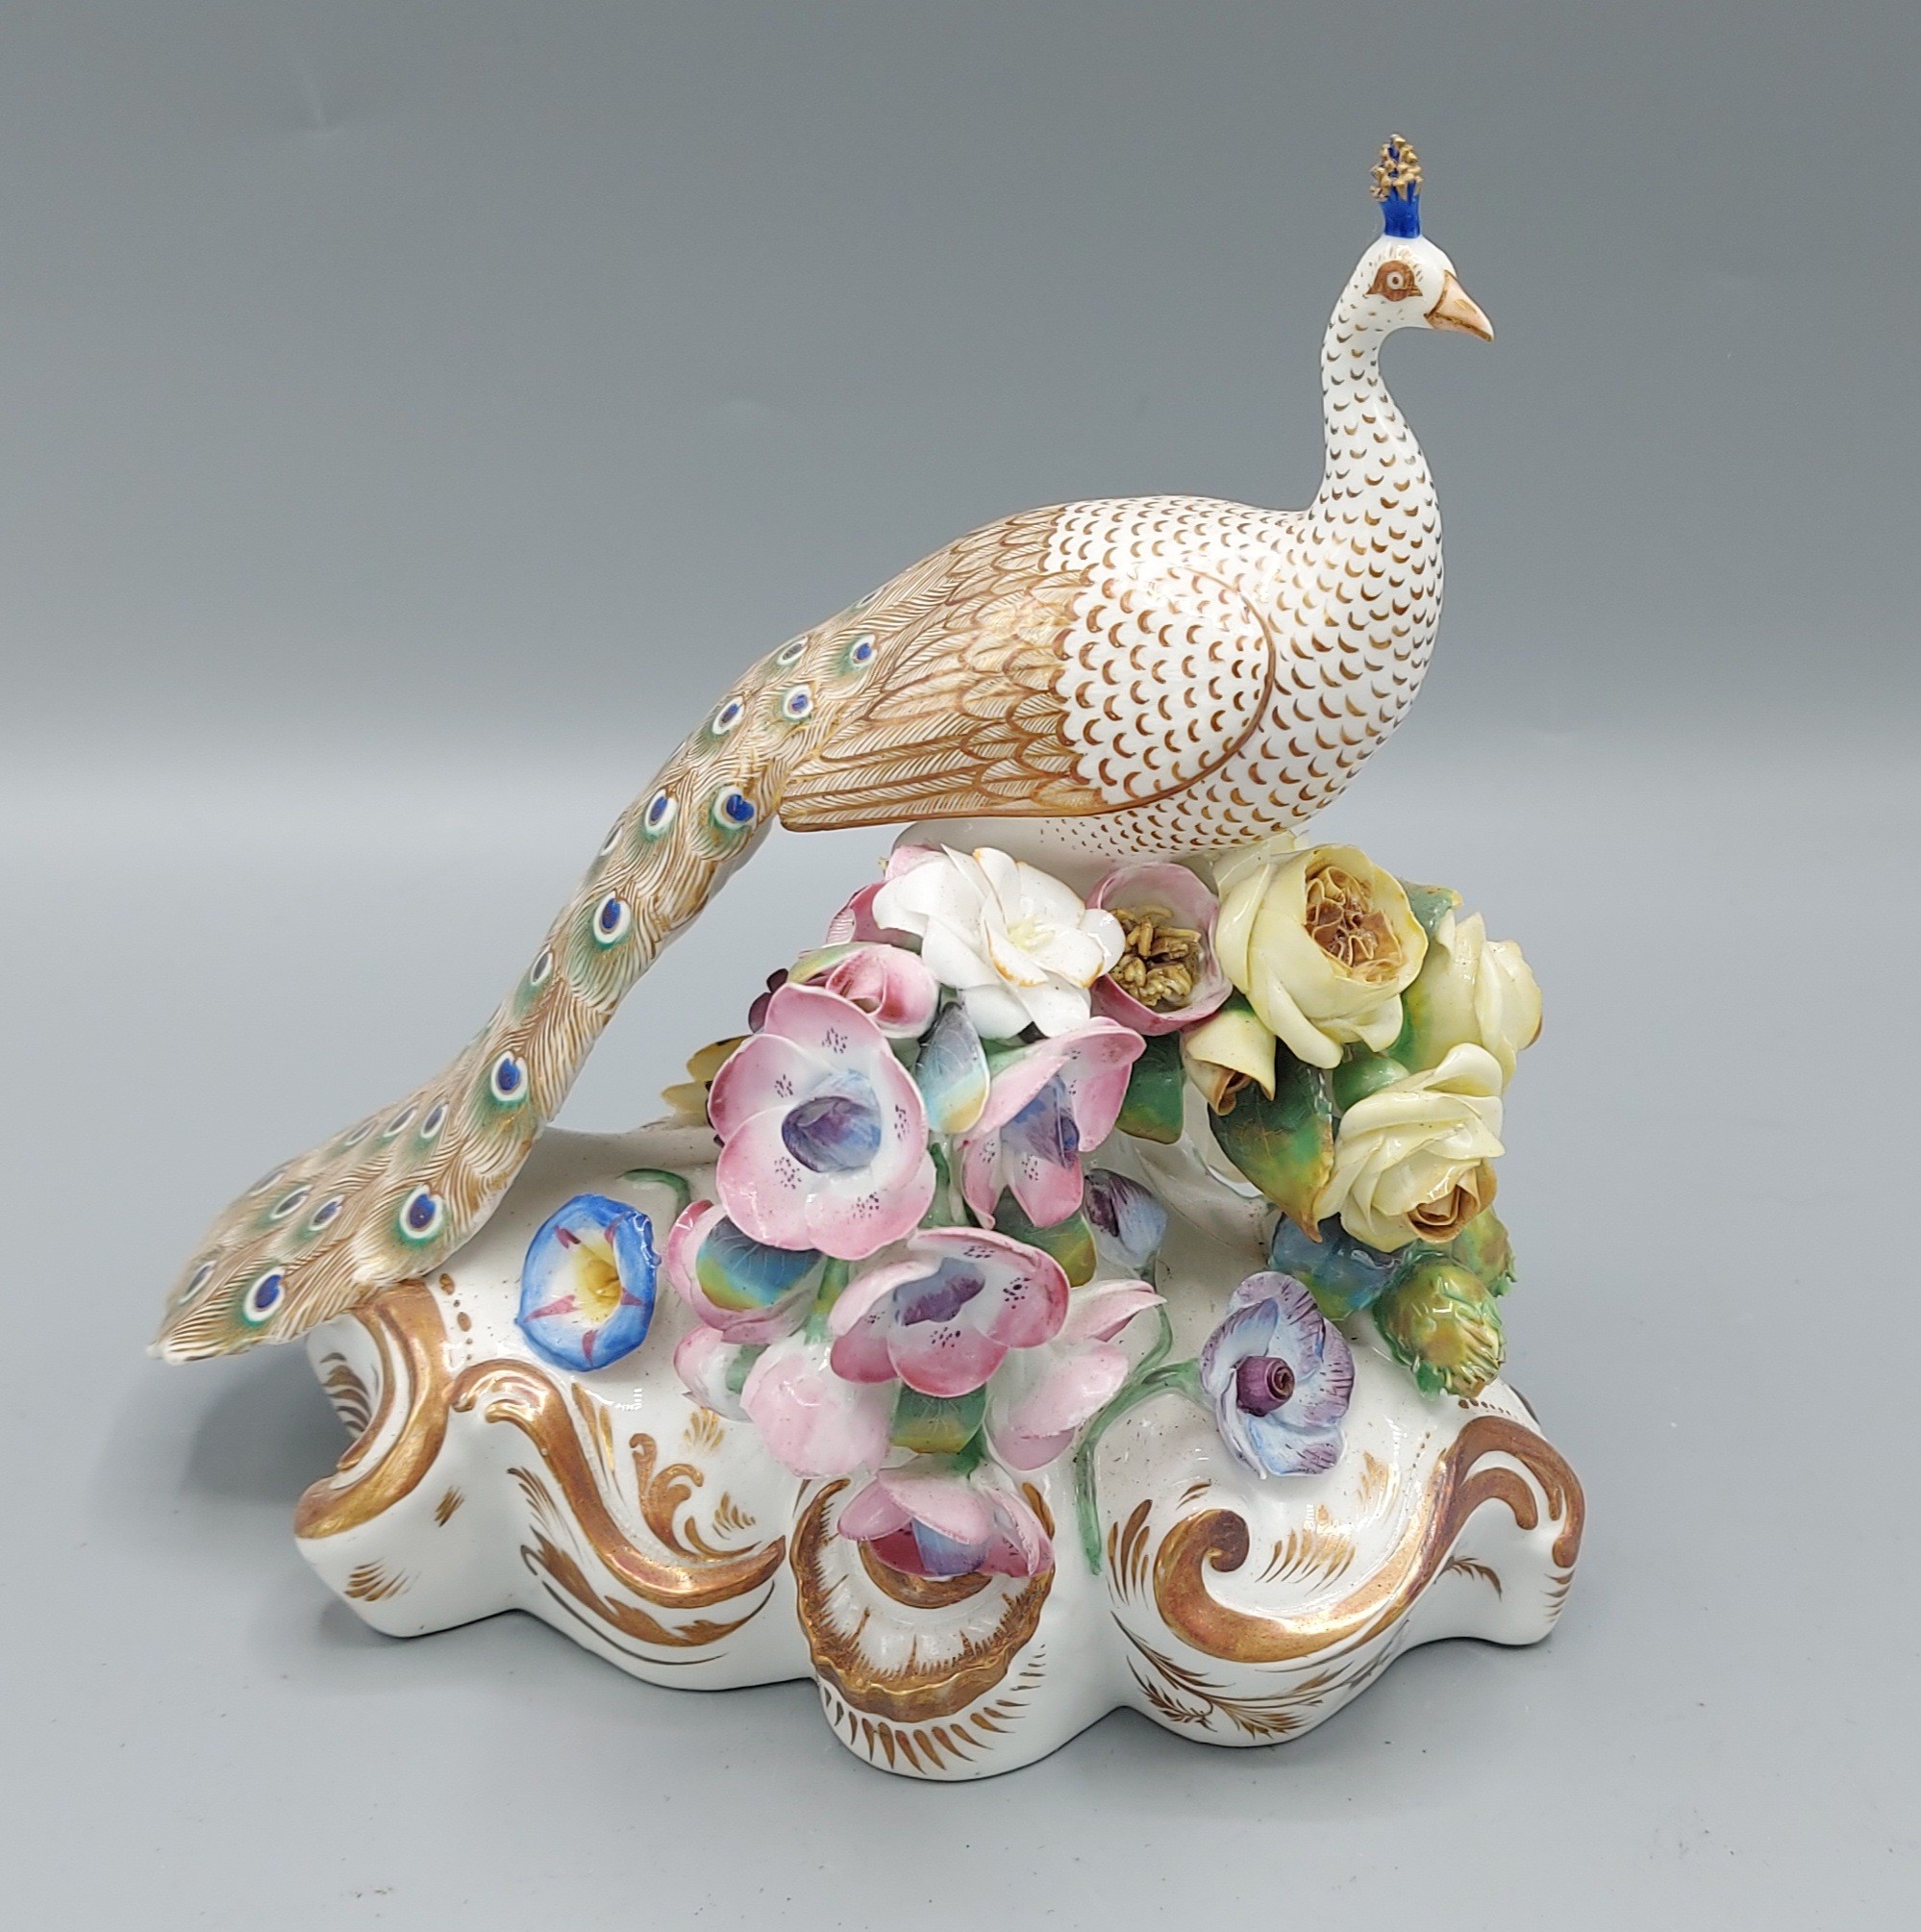 A 19th Century possibly Derby porcelain model in the form of a Peacock with foliate encrusted